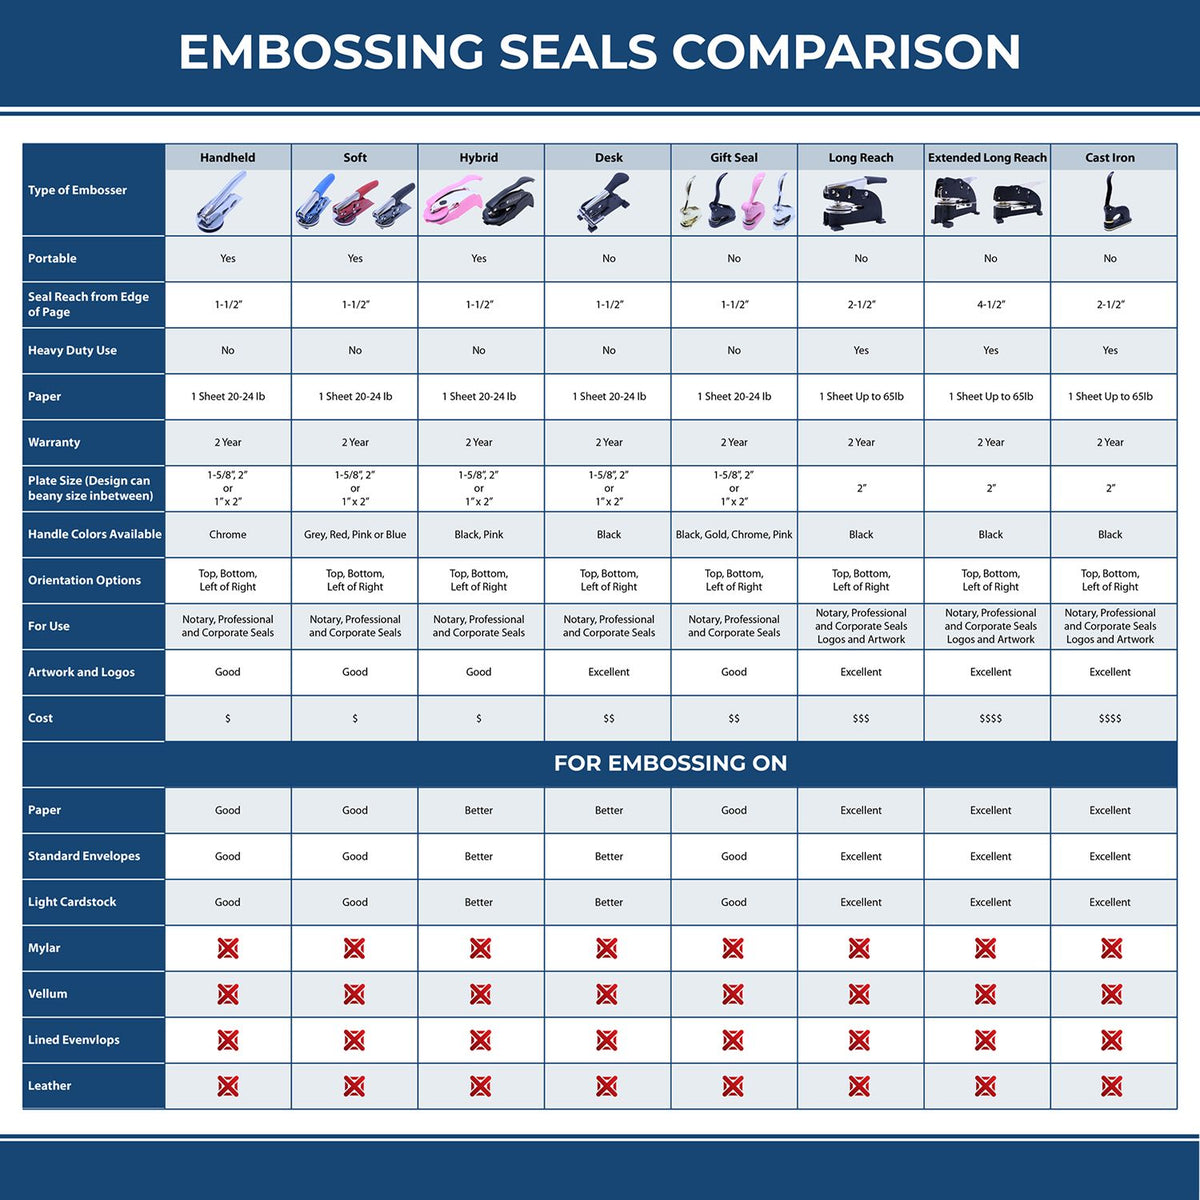 A comparison chart for the different types of mount models available for the Heavy Duty Cast Iron Indiana Geologist Seal Embosser